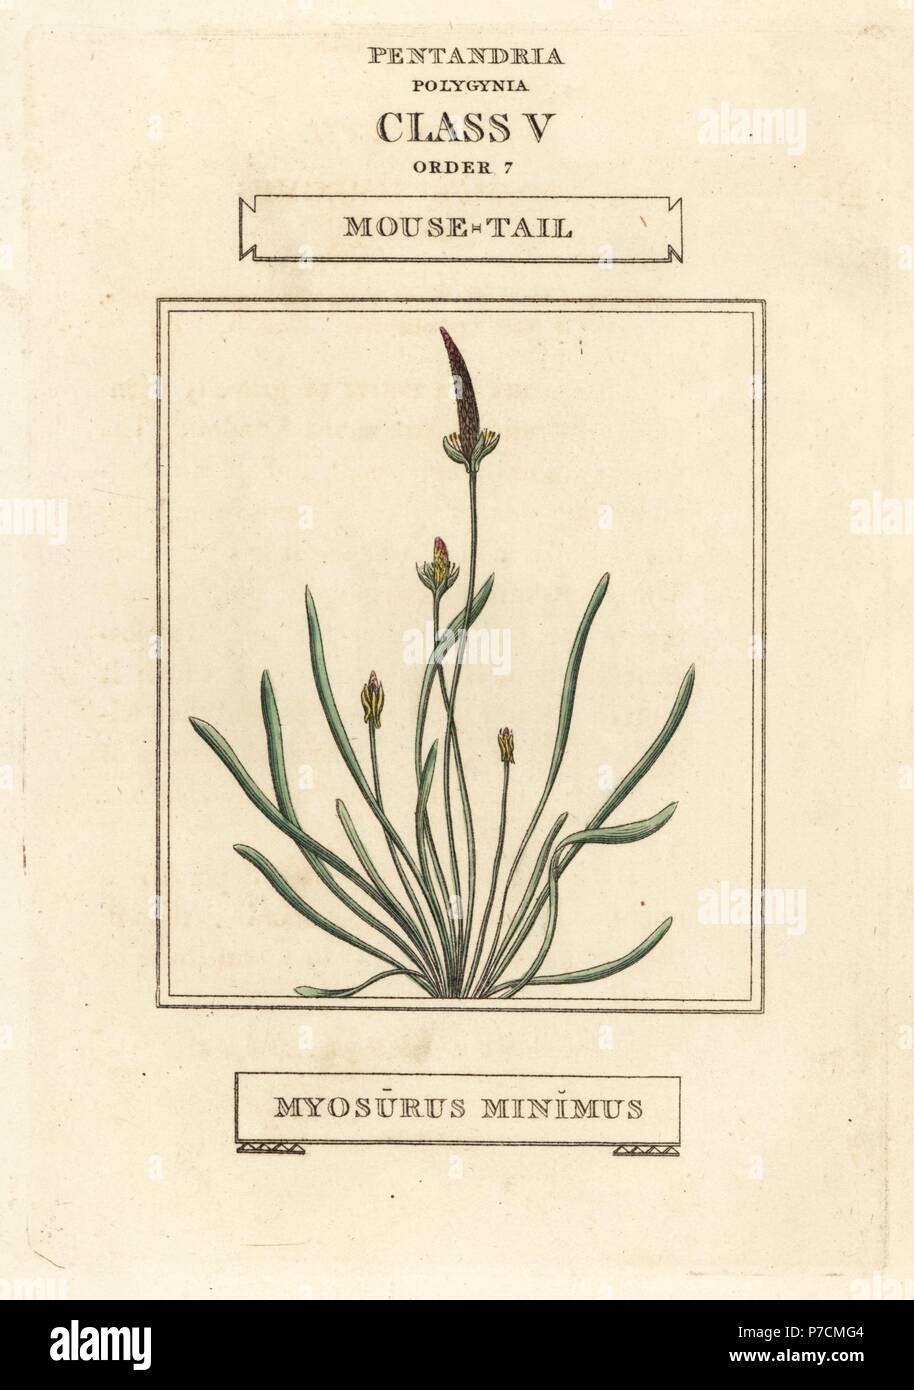 Mousetail, Myosurus minimus. Handcoloured copperplate engraving after an illustration by Richard Duppa from his The Classes and Orders of the Linnaean System of Botany, Longman, Hurst, London, 1816. Stock Photo